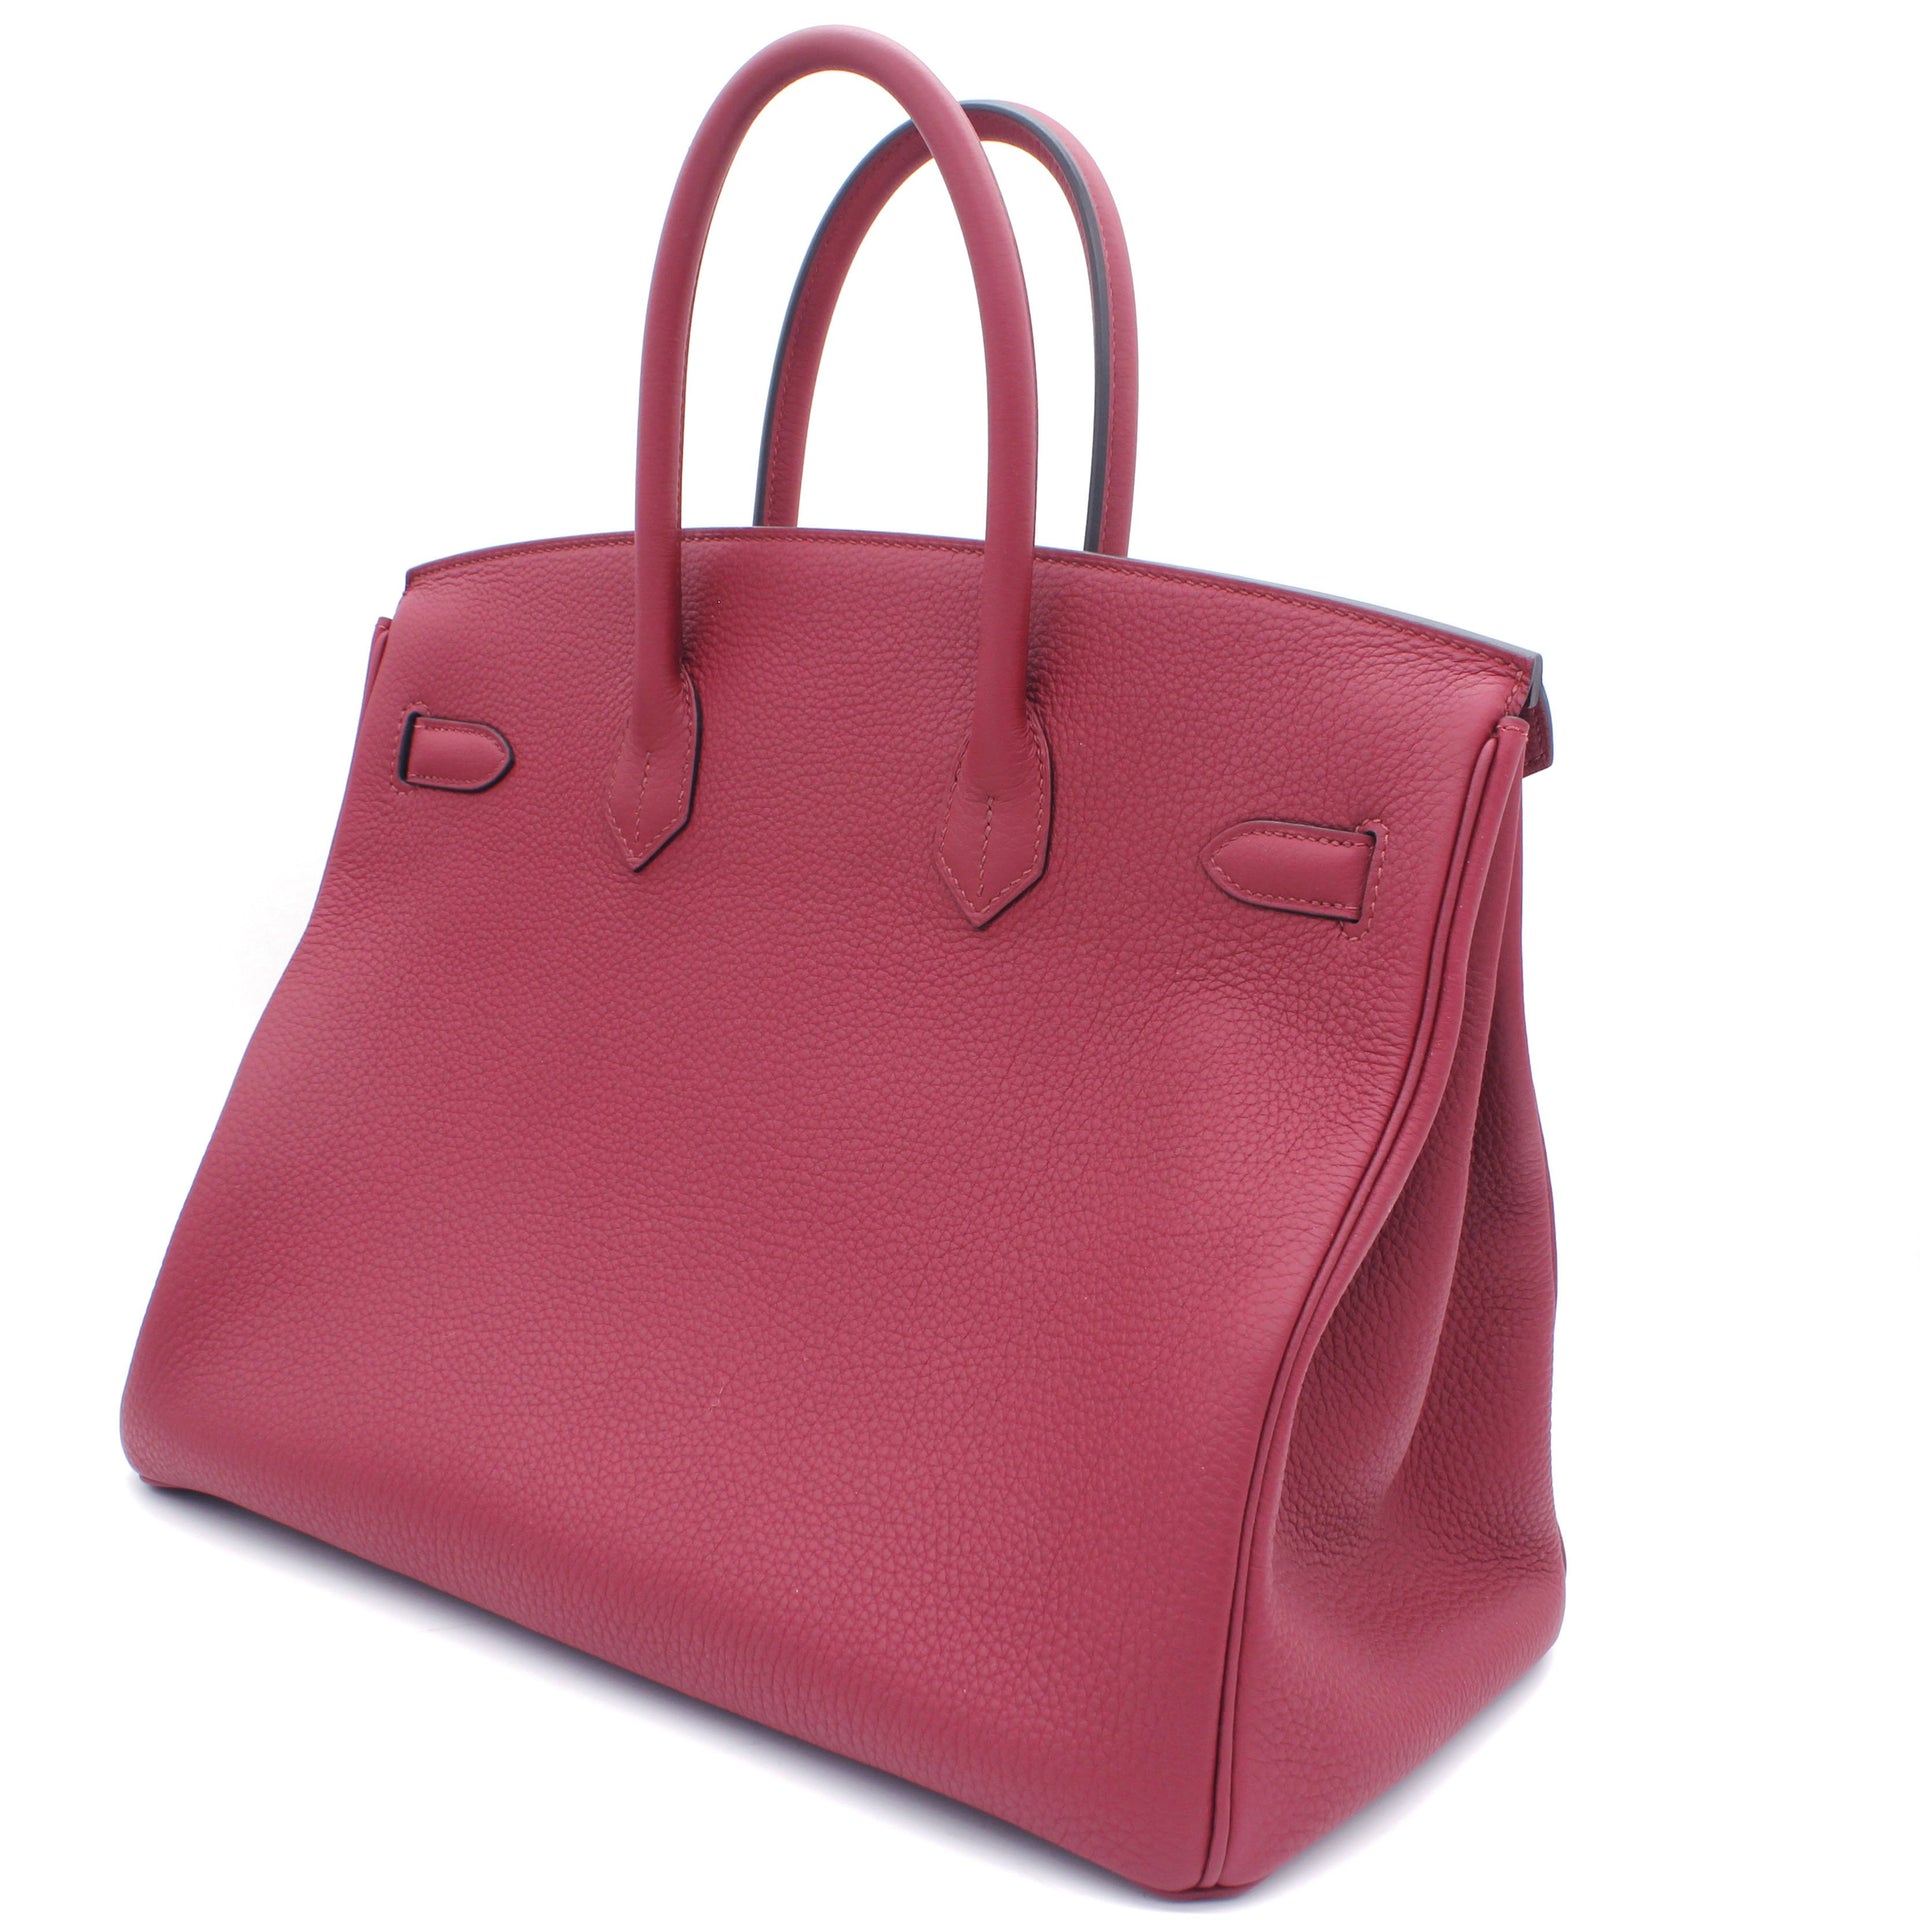 Offered 2 Rouge color Birkins and I need your HELP!